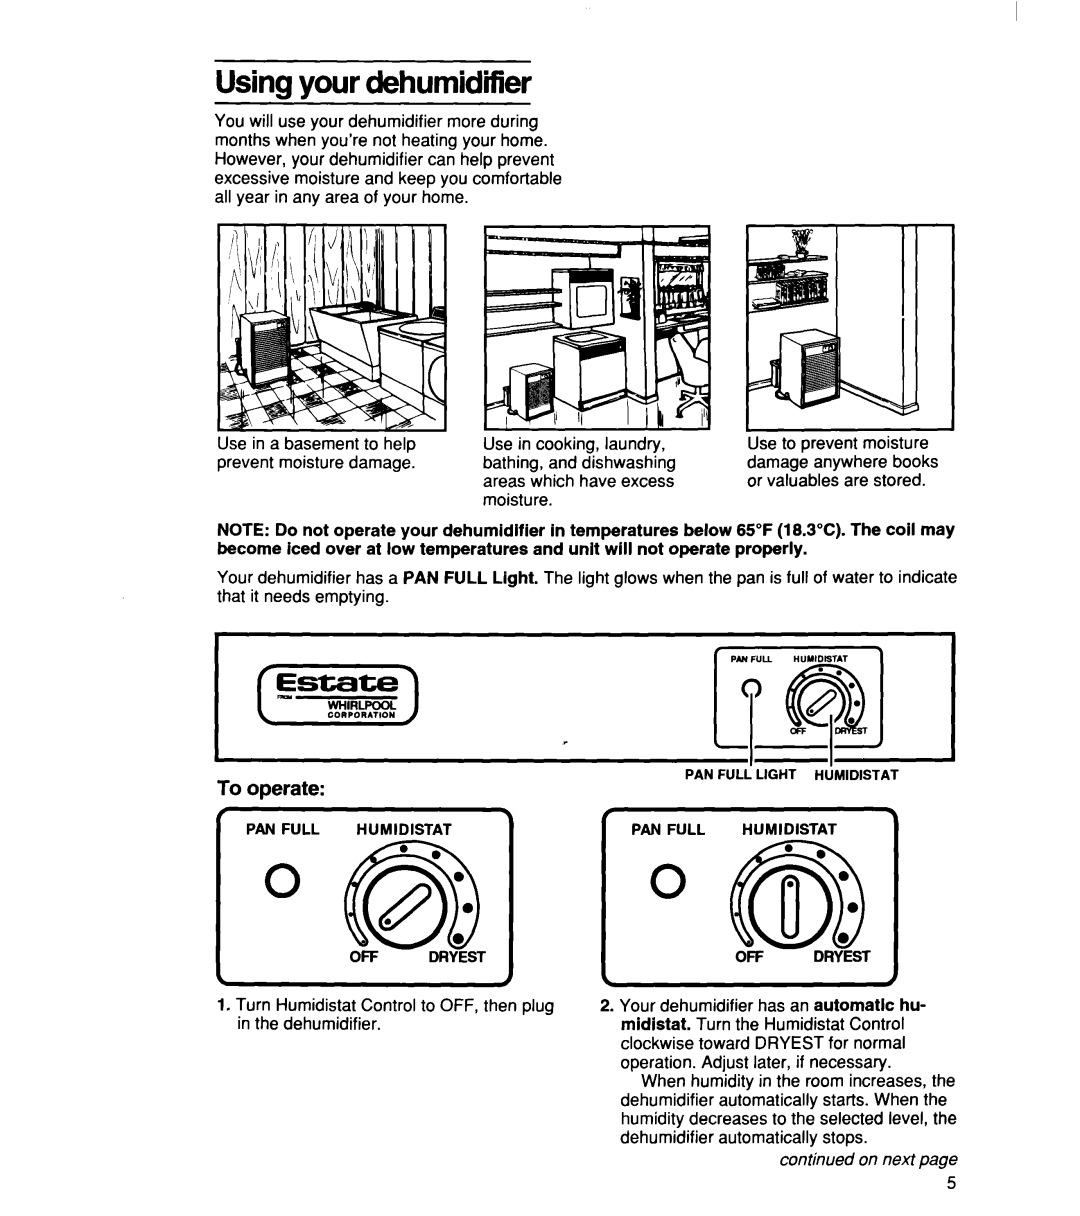 Whirlpool TD2500XF0 manual Using your dehumidifier, To operate, continued on next page 